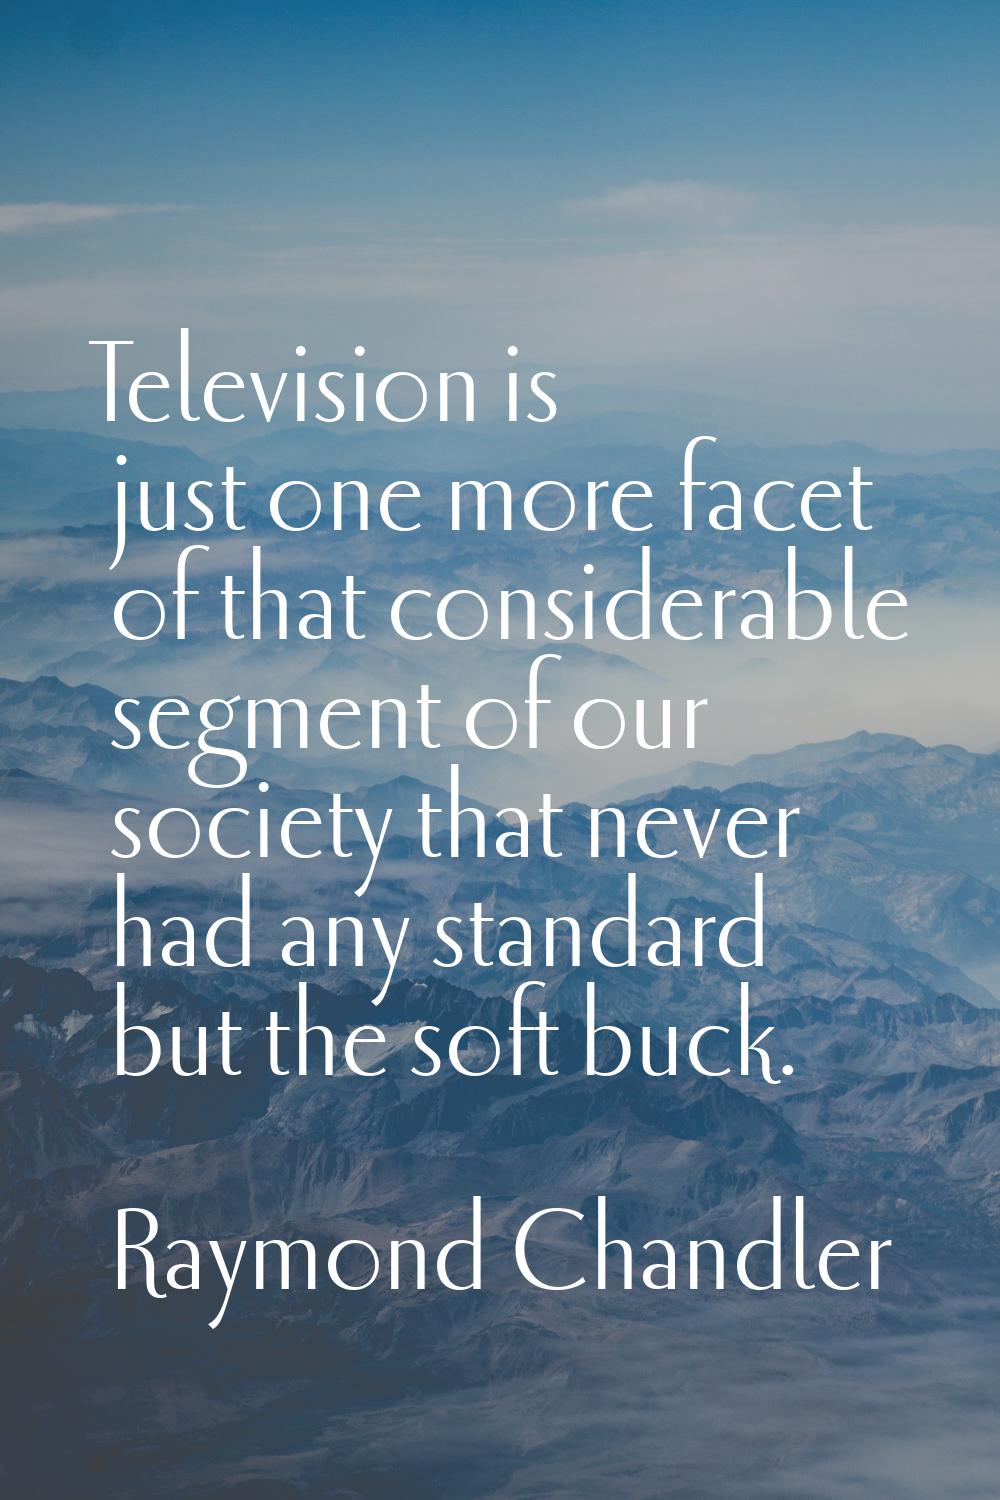 Television is just one more facet of that considerable segment of our society that never had any st